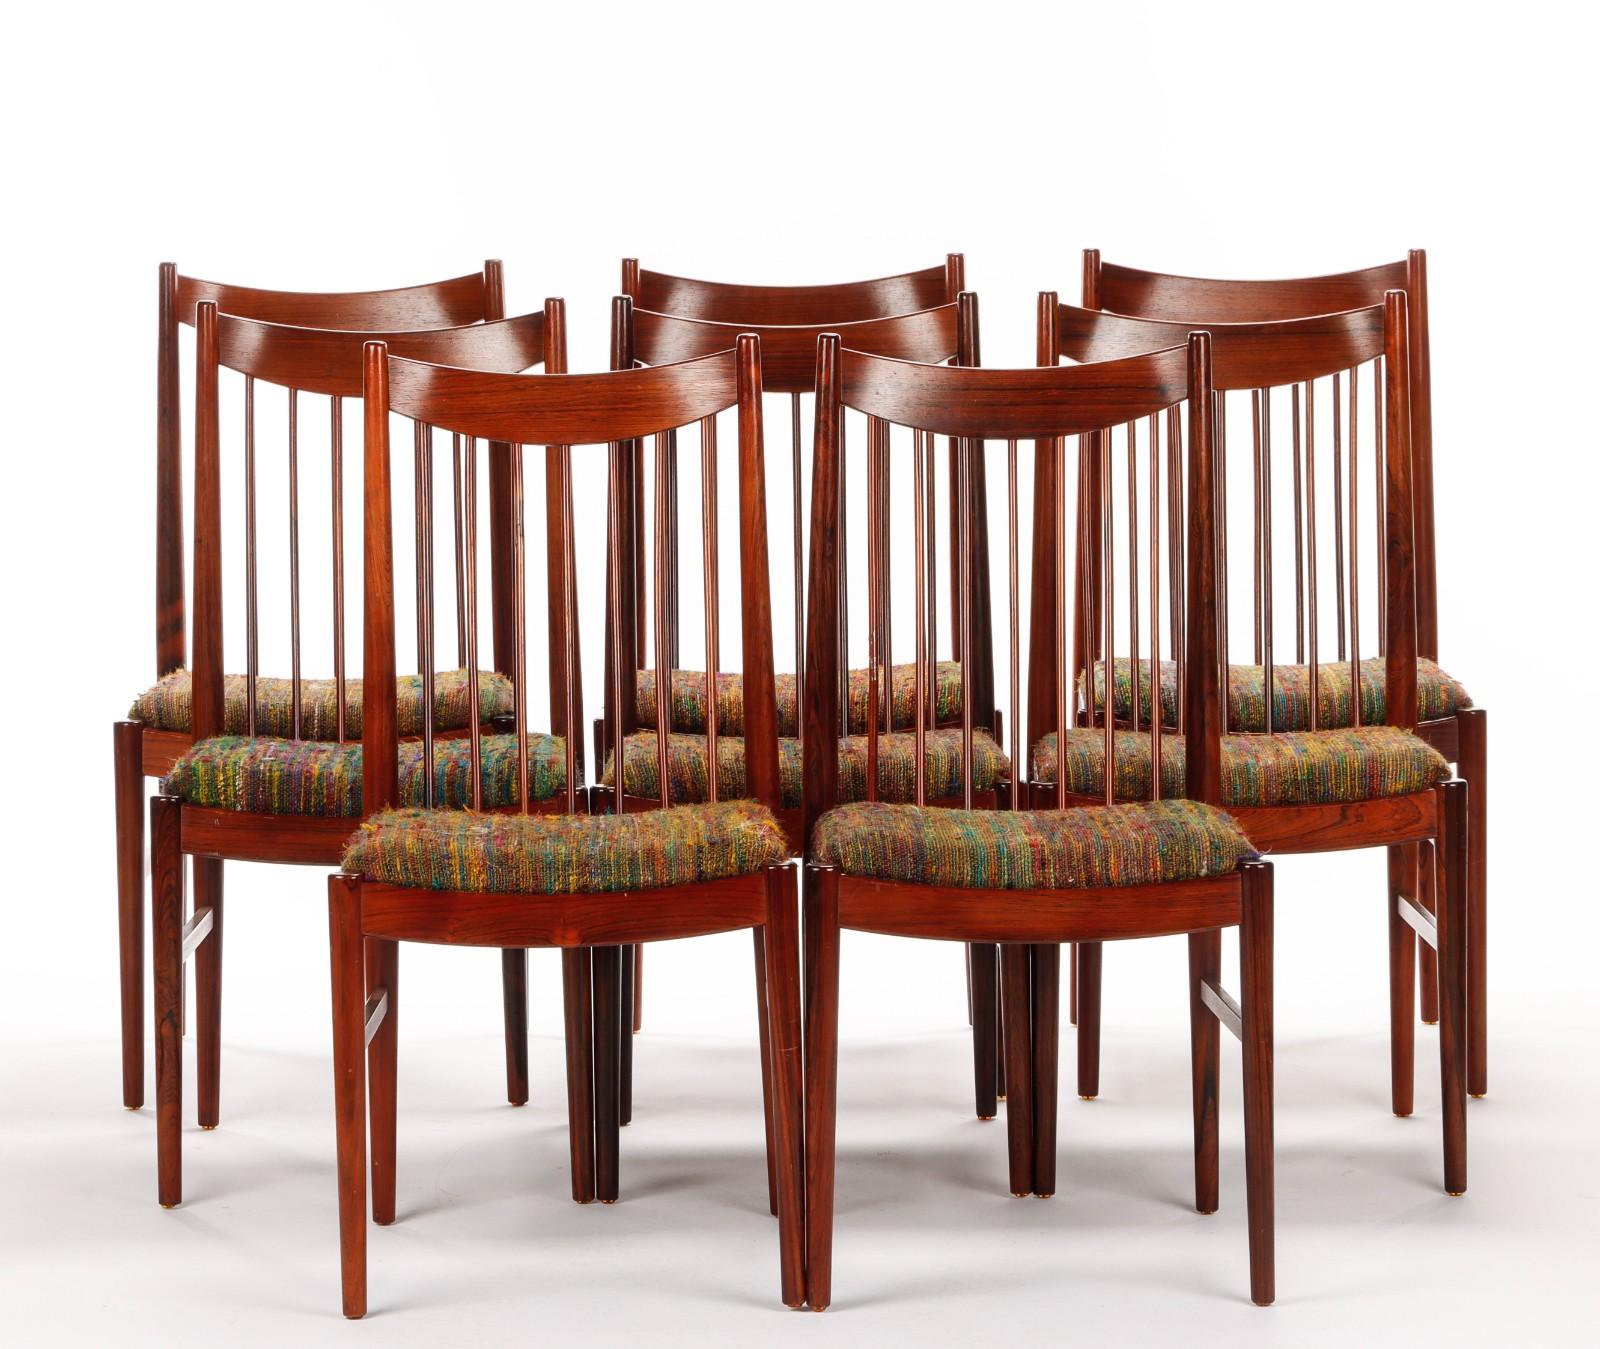 Set of eight dining chairs made of solid rosewood, wooden back with molded cup piece, seats upholstered in woolen fabric. Desiged in the 1960s by Arne Vodder for Sibast furniture, model 422. H. 98 cm. Sh. 46 cm. Has traces of use and some repairs.